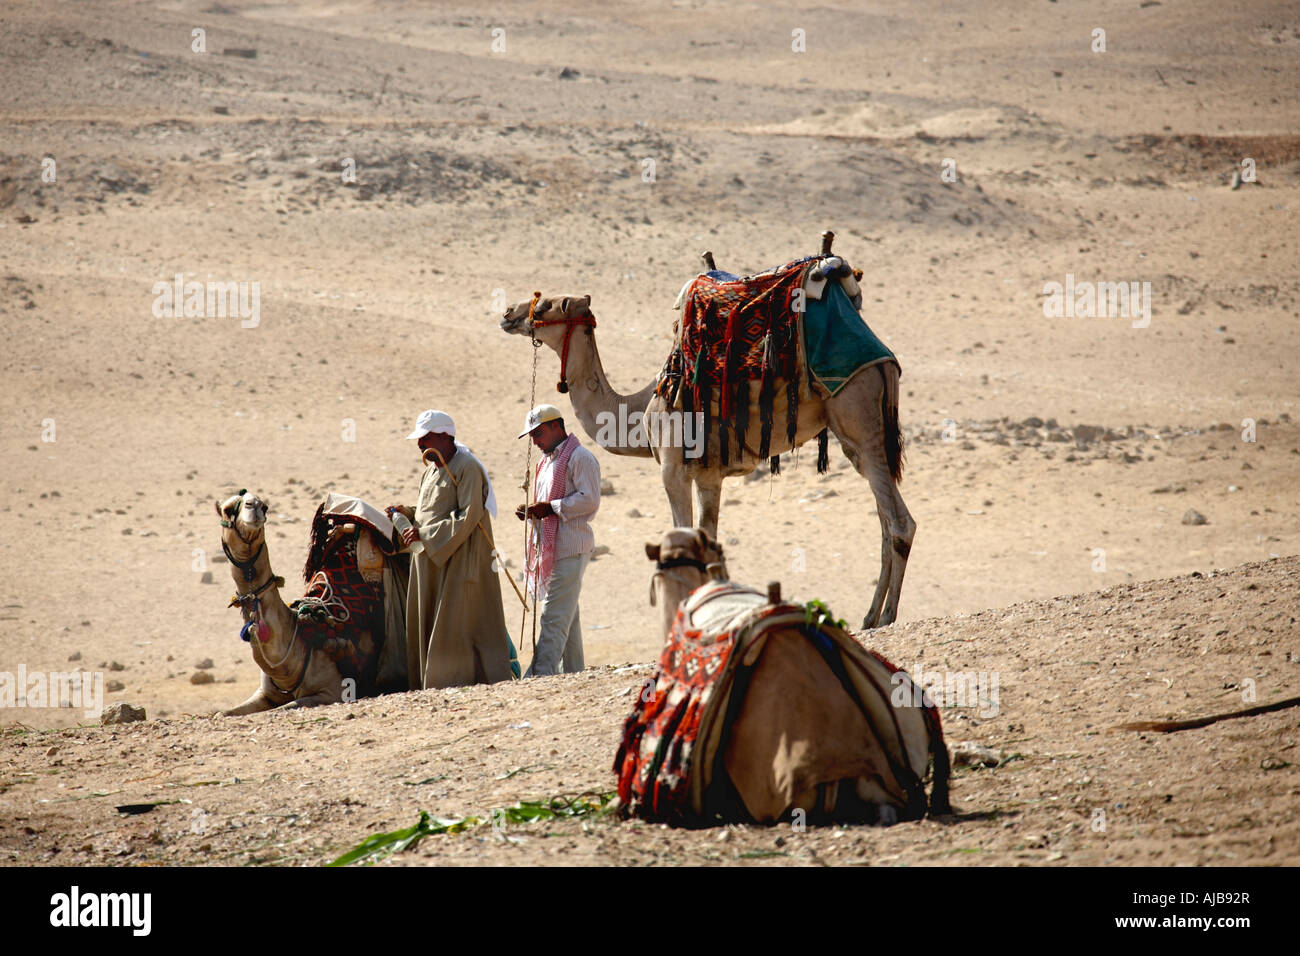 Camels and guides on stony desert viewing plateau above the Pyramids Giza Cairo Egypt Africa Stock Photo